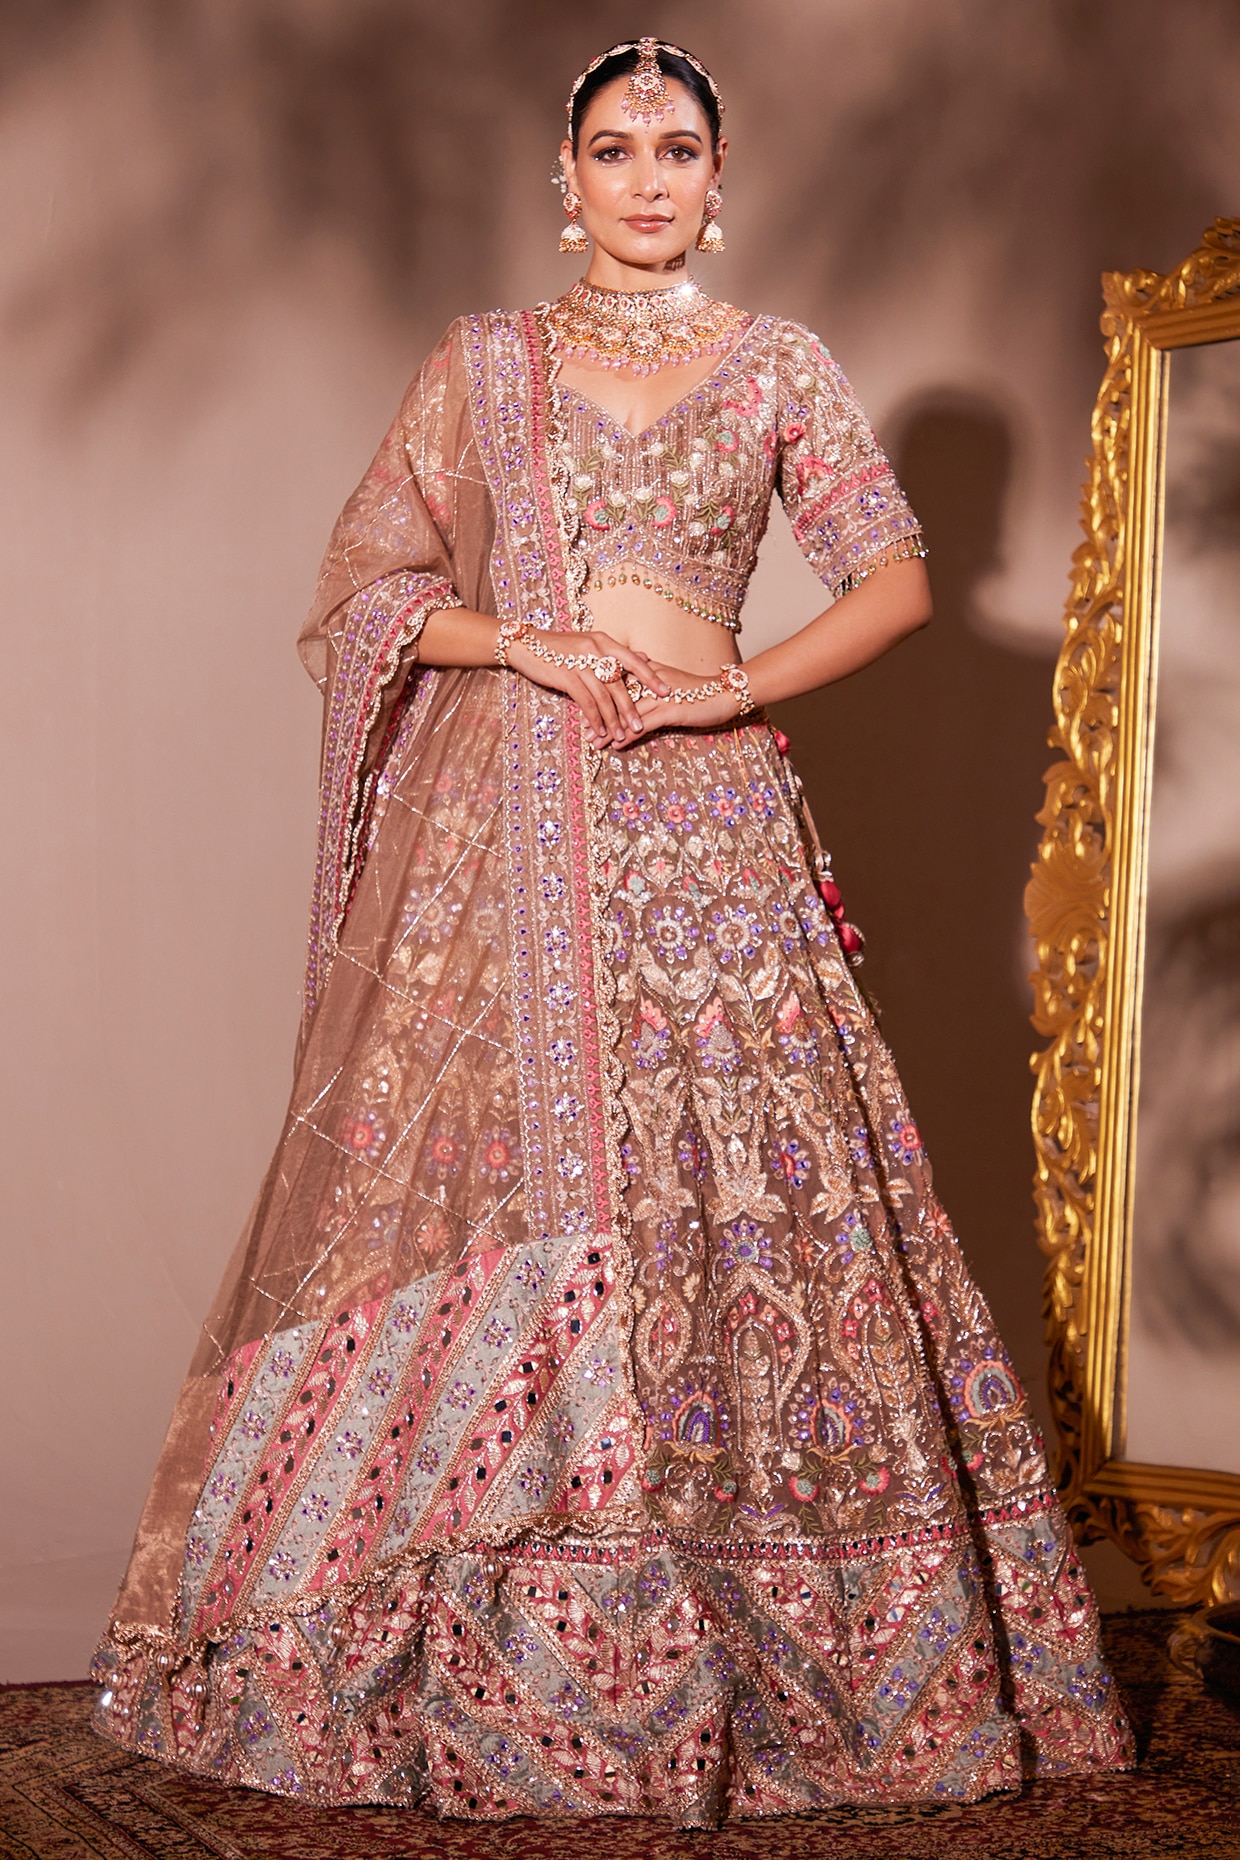 Under Rs 50,000 - How to Select a Non-Bridal lehenga in your Budget